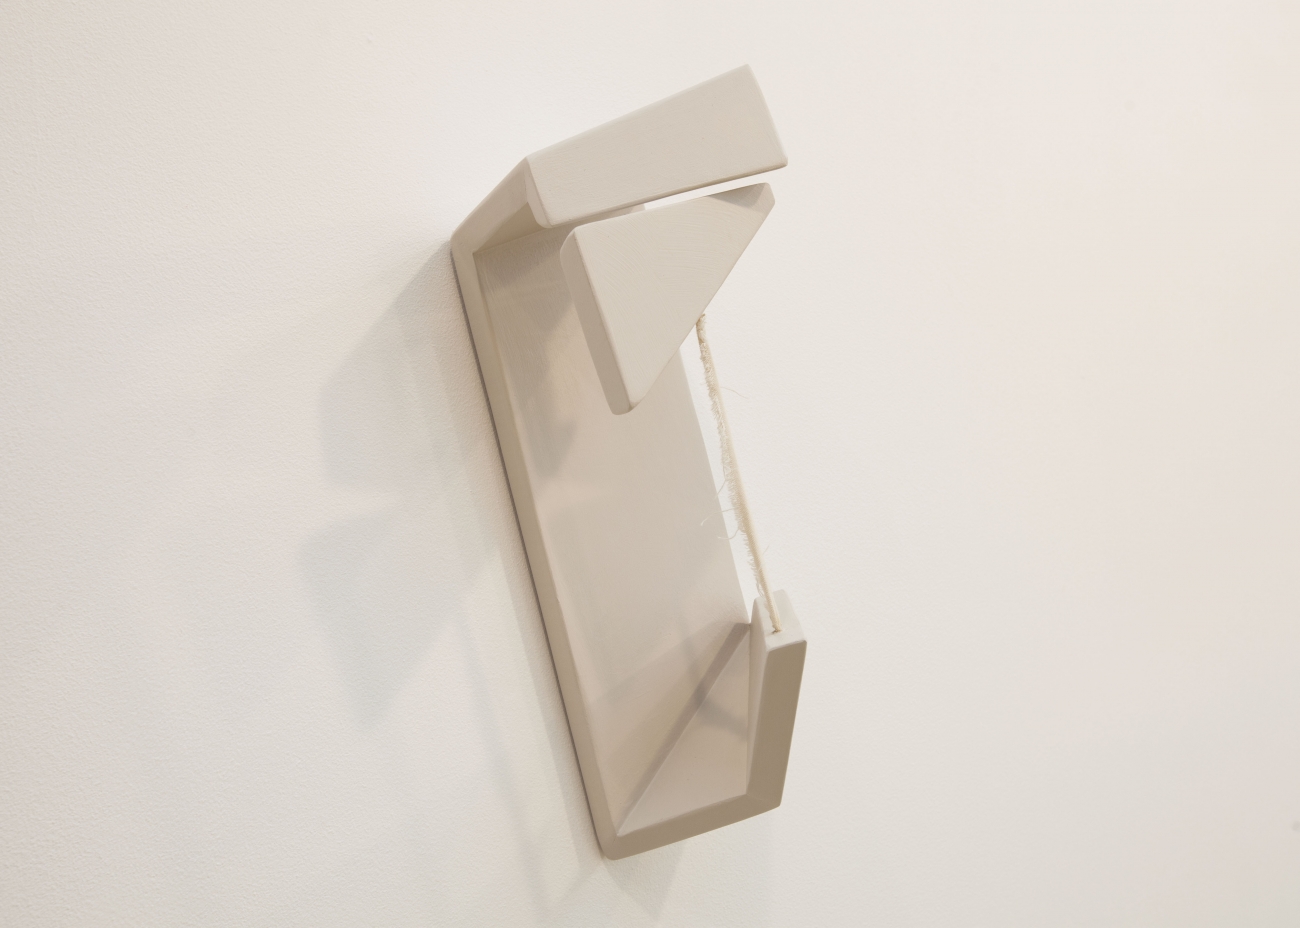 wall-mounted sculpture by Meghan Grubb